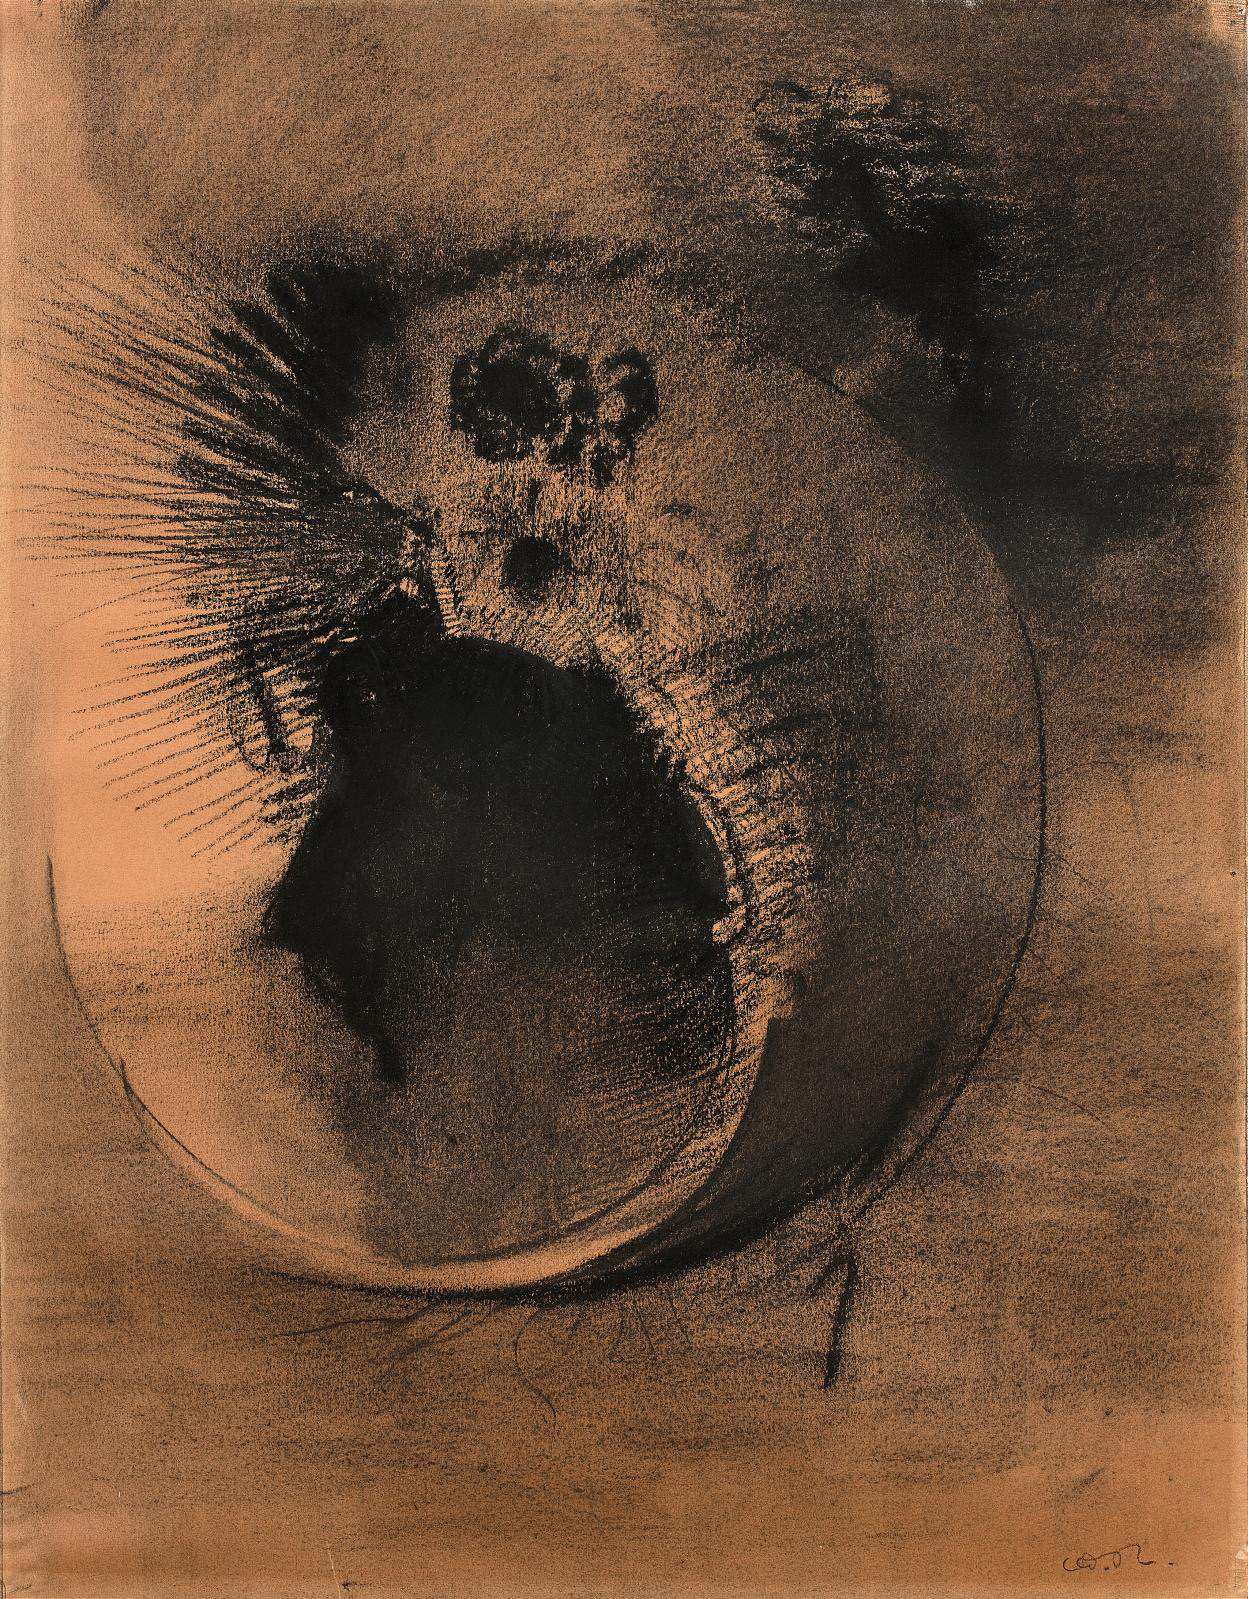 Odilon Redon, Visage cellulaire, charcoal and stump drawing, 48.5 x 37.5 cm/19 x 14.7 in.Estimate: €80,000/120,000